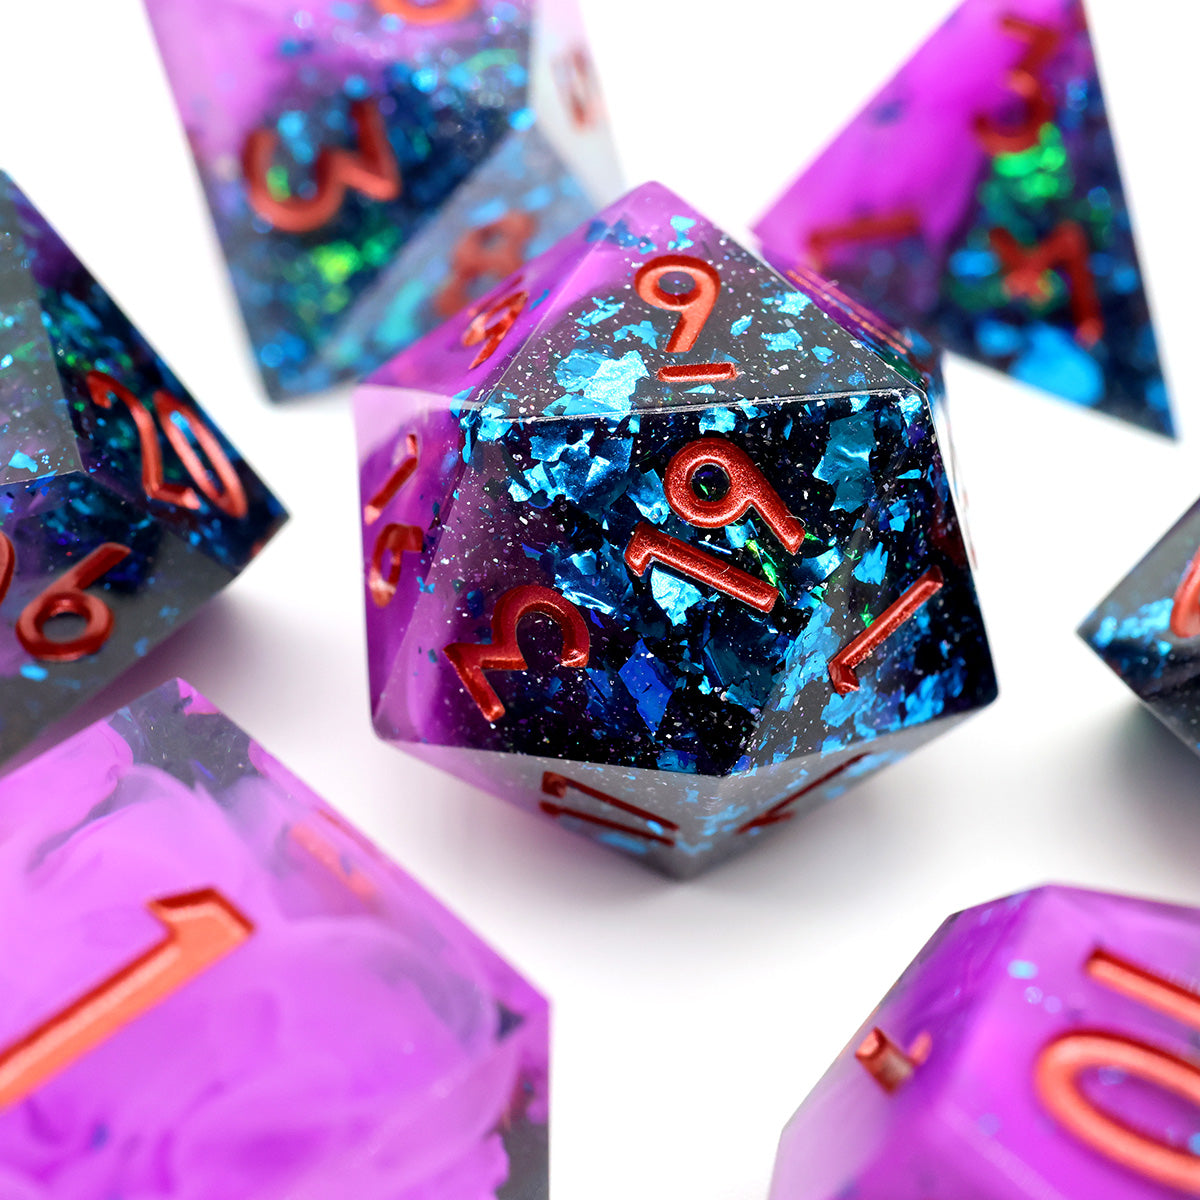 sharp edge dnd TTRPG, dice set for role playing games and dice goblin collectors